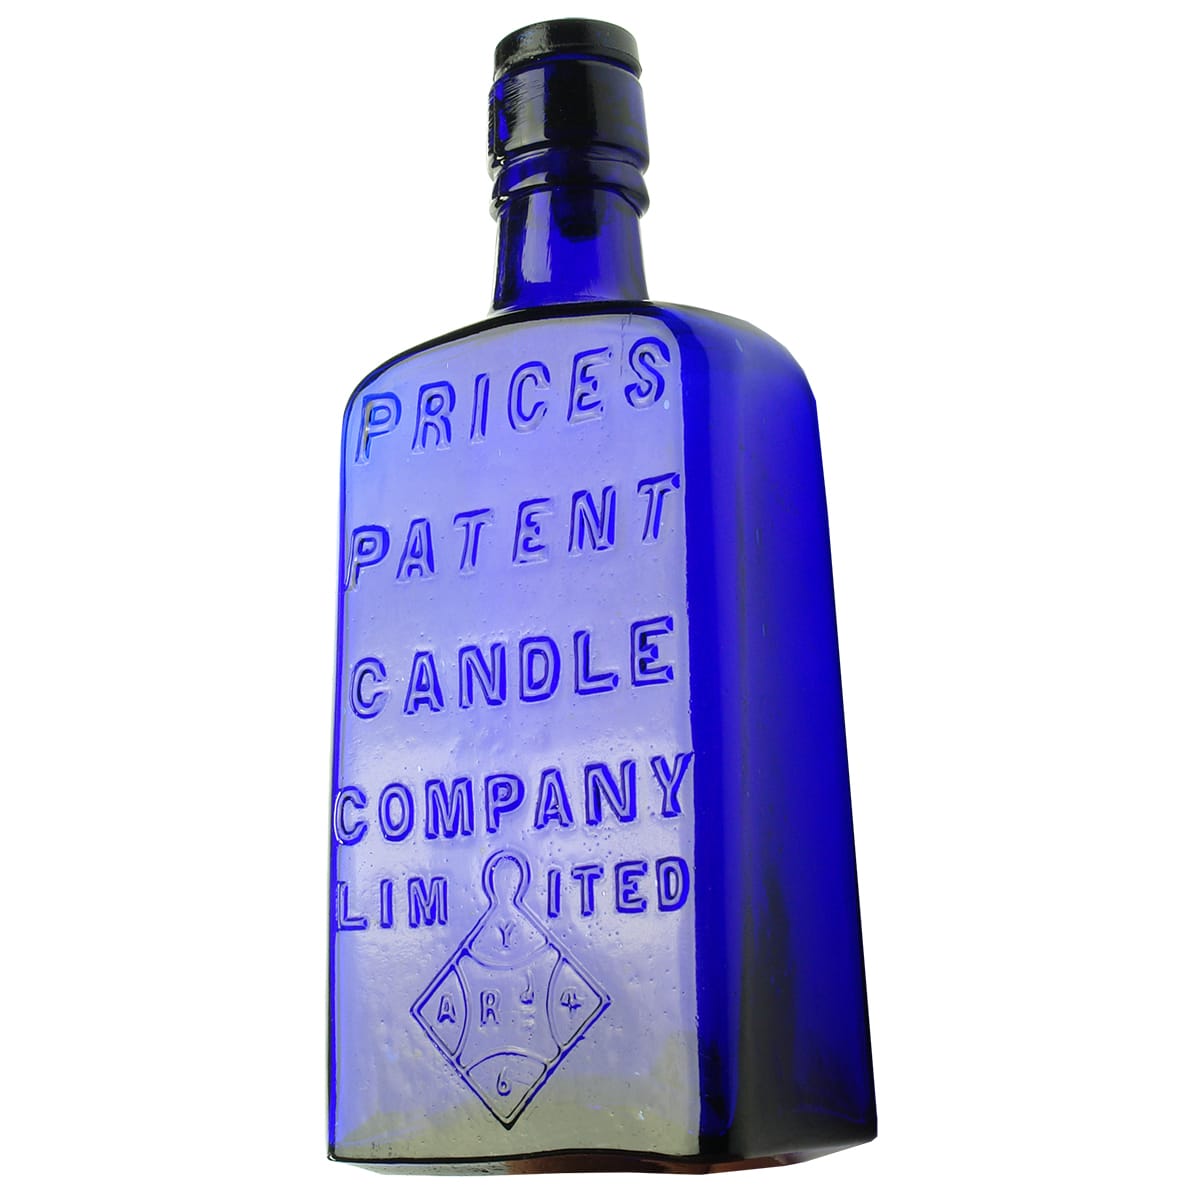 Prices Patent Candle Company. Blue. 10 oz.